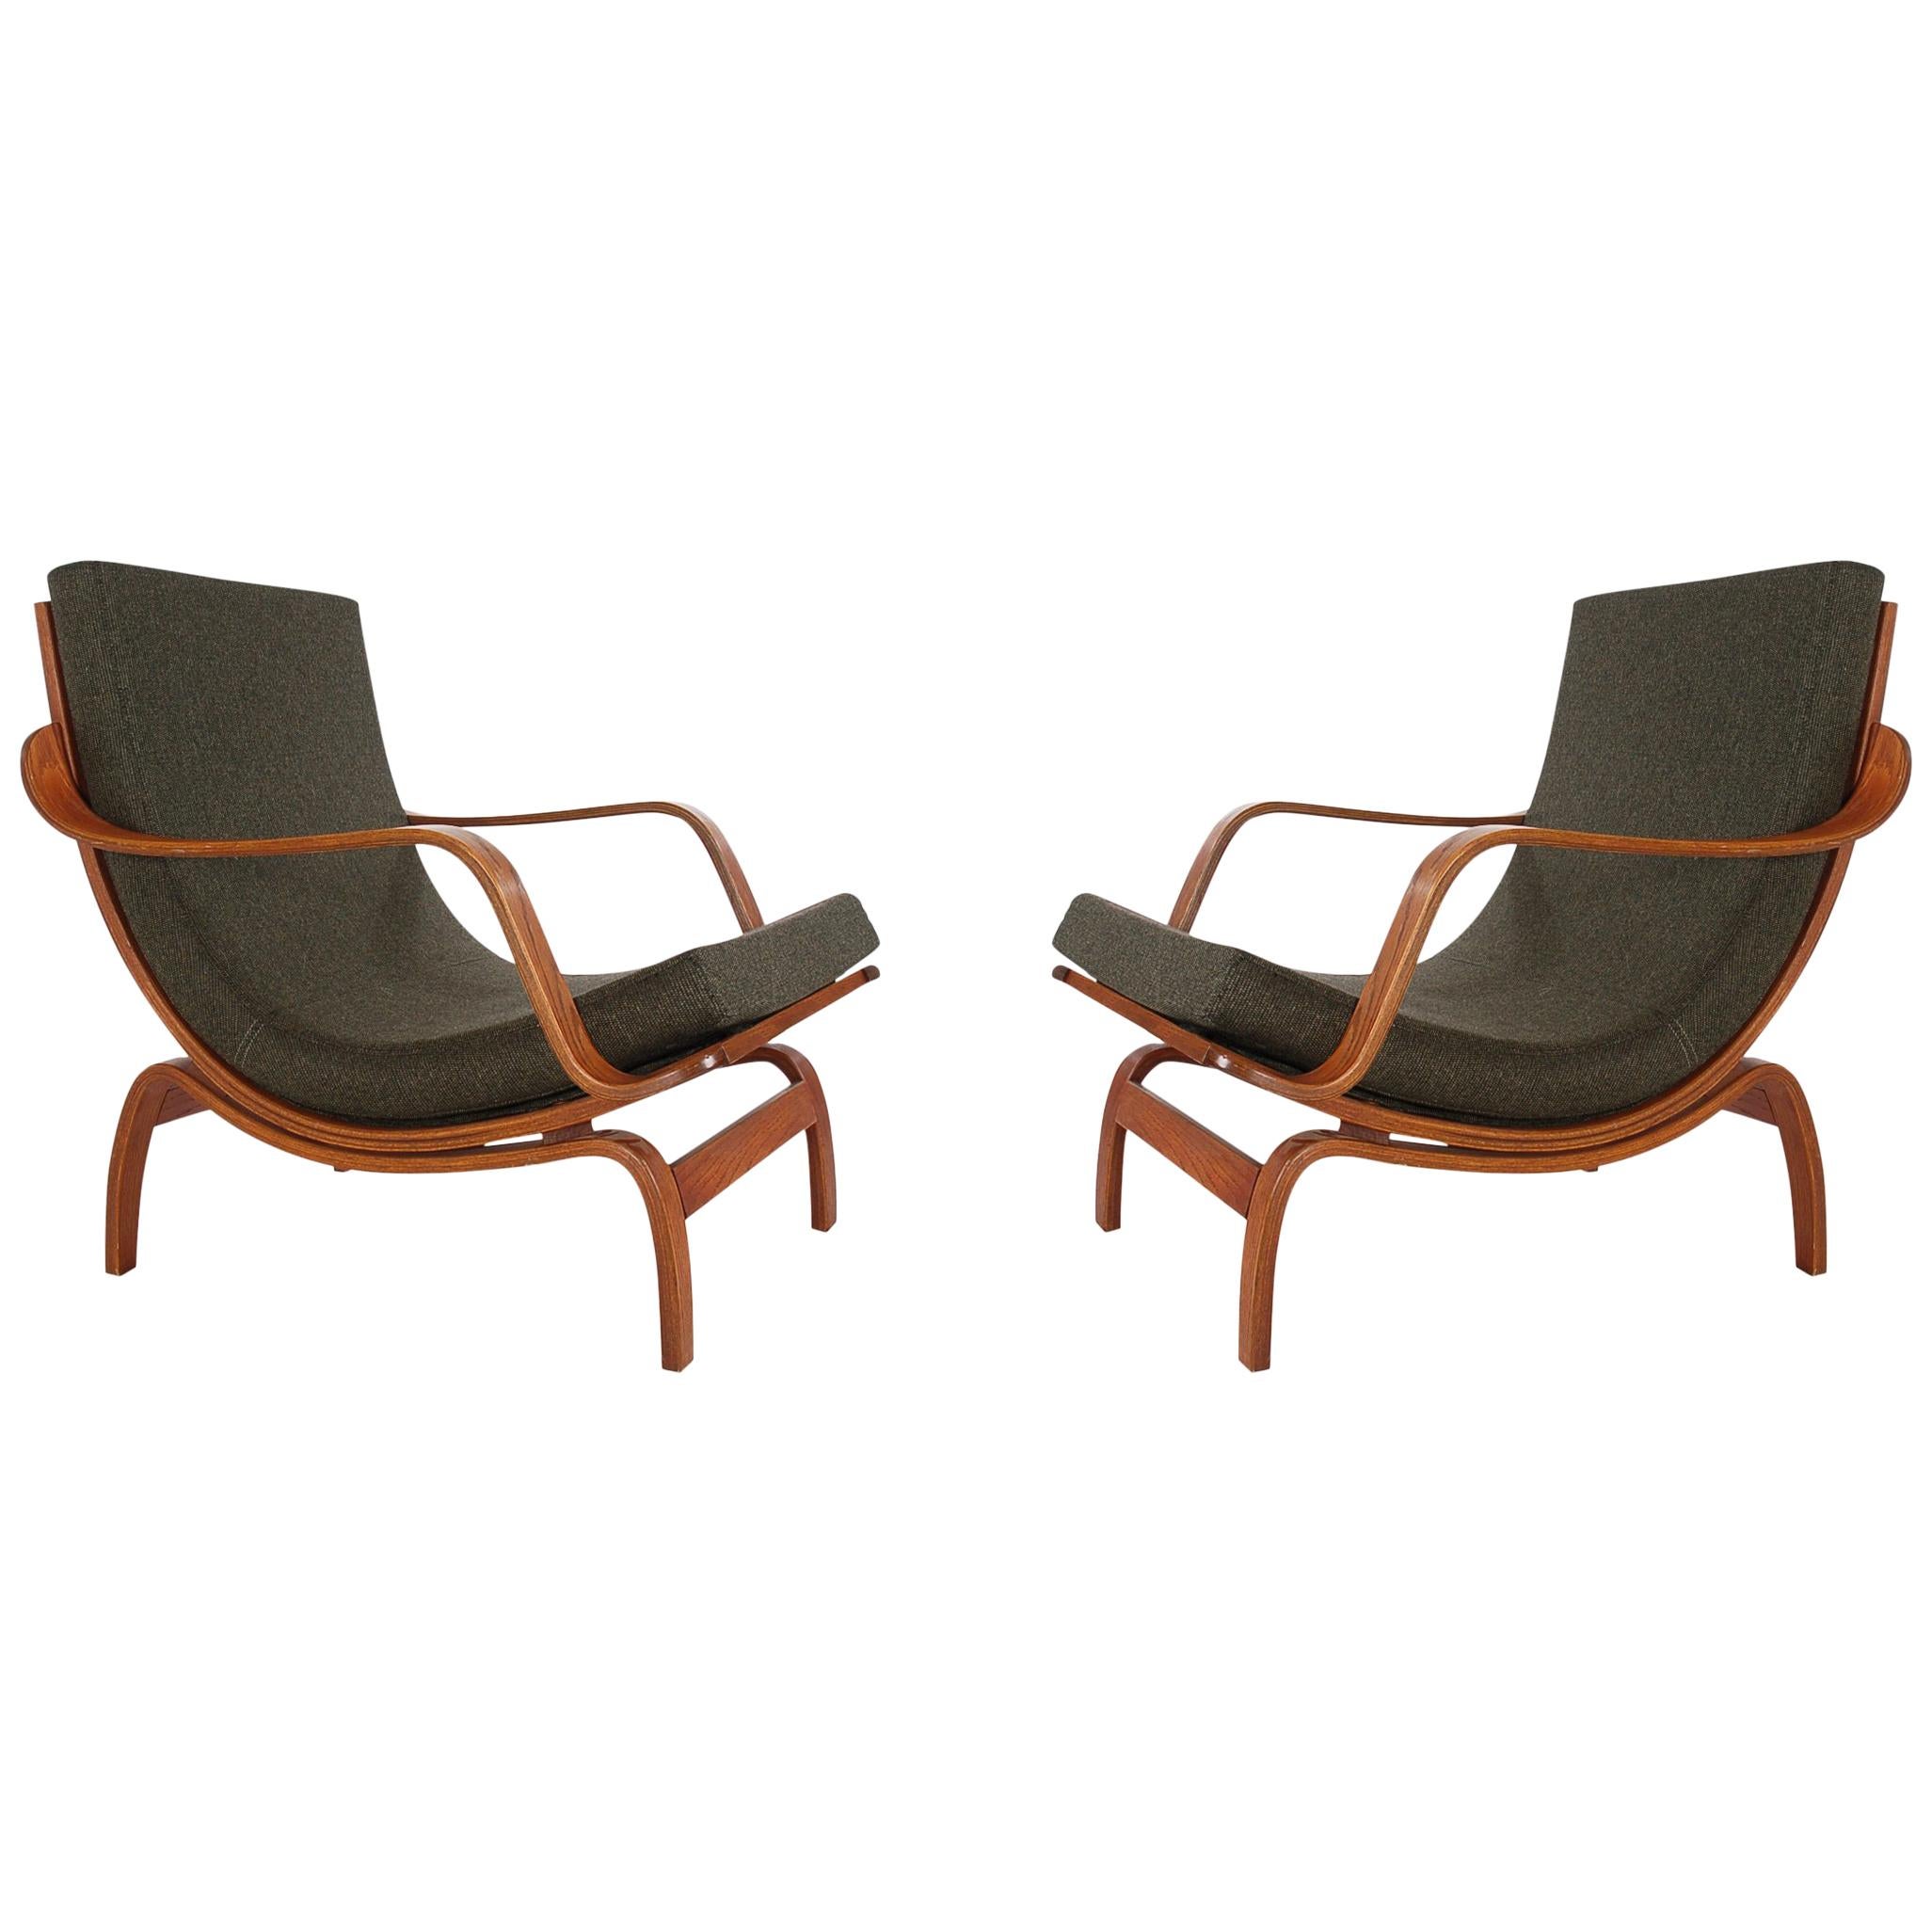 Pair of Midcentury Danish Modern Bentwood Lounge Chairs in Walnut Stained Oak